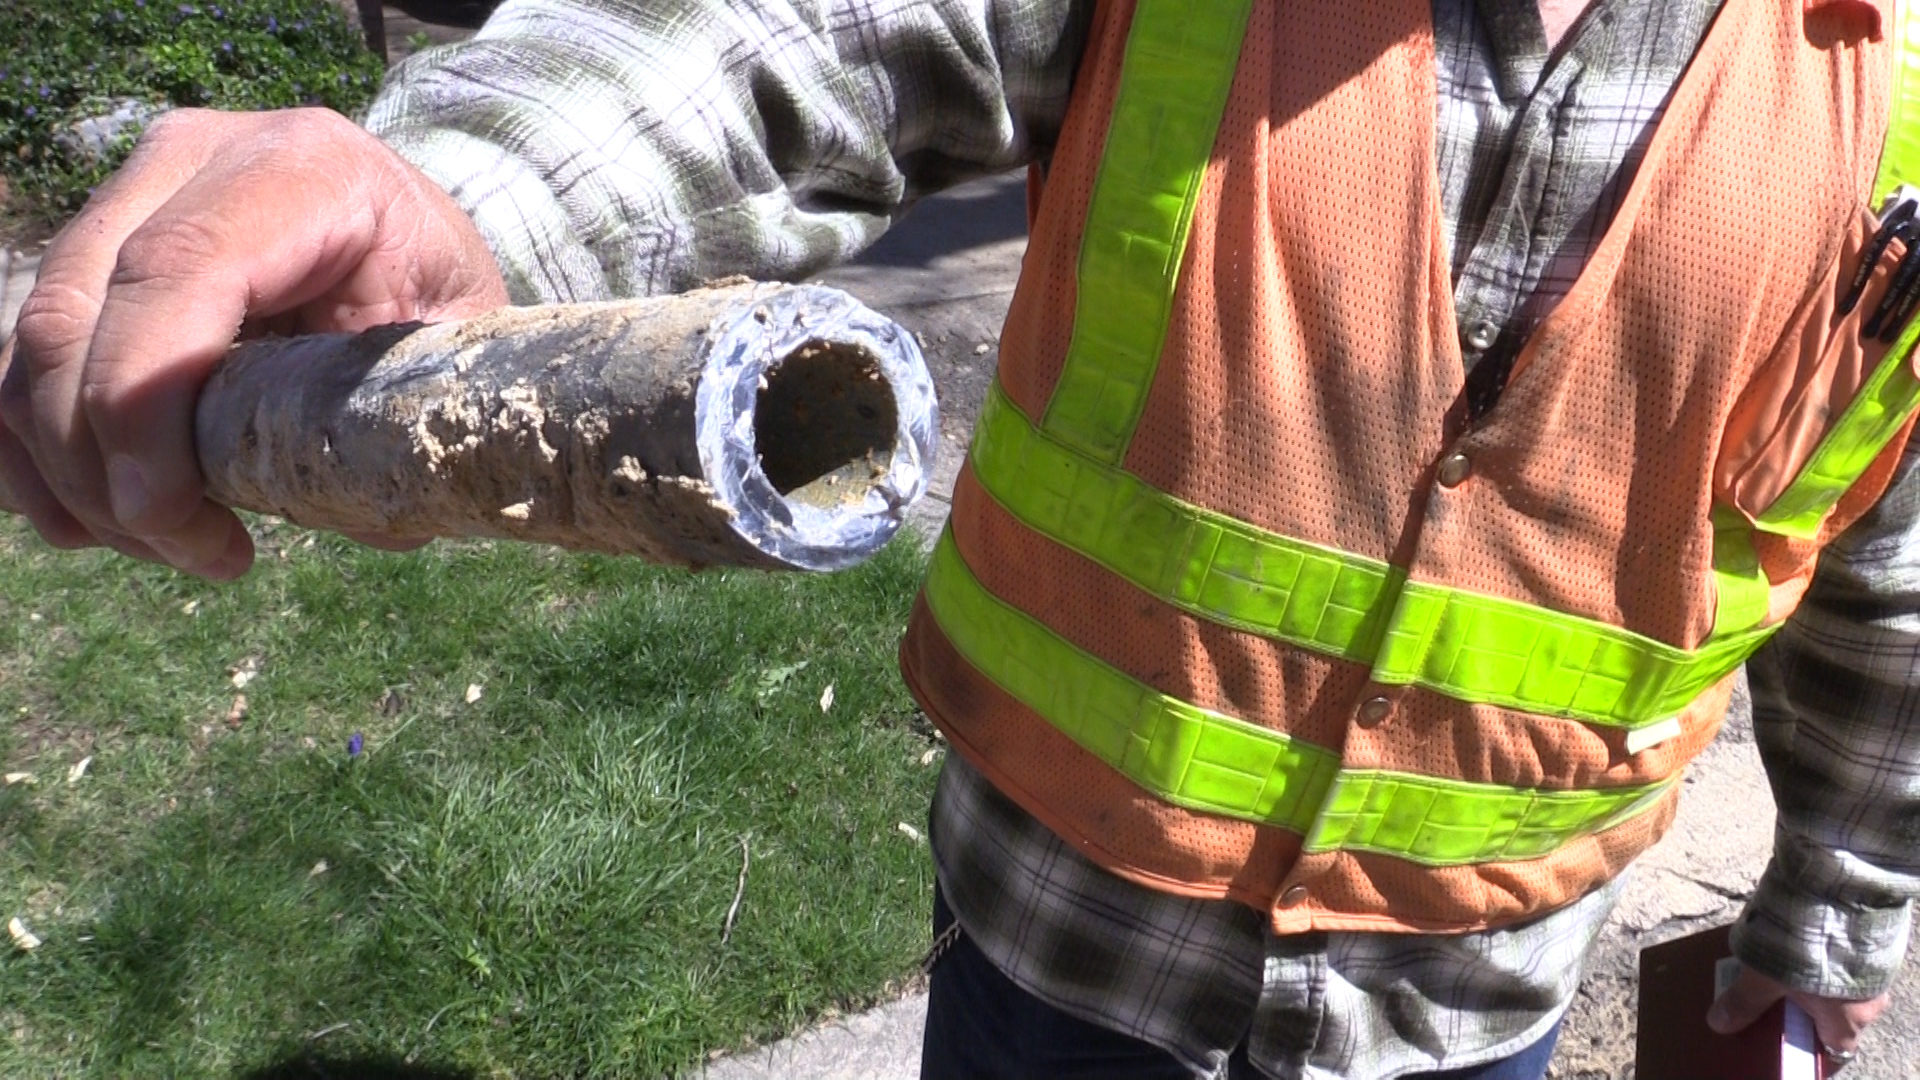 A segment of a lead service line discovered and replaced during a Denver Water project.